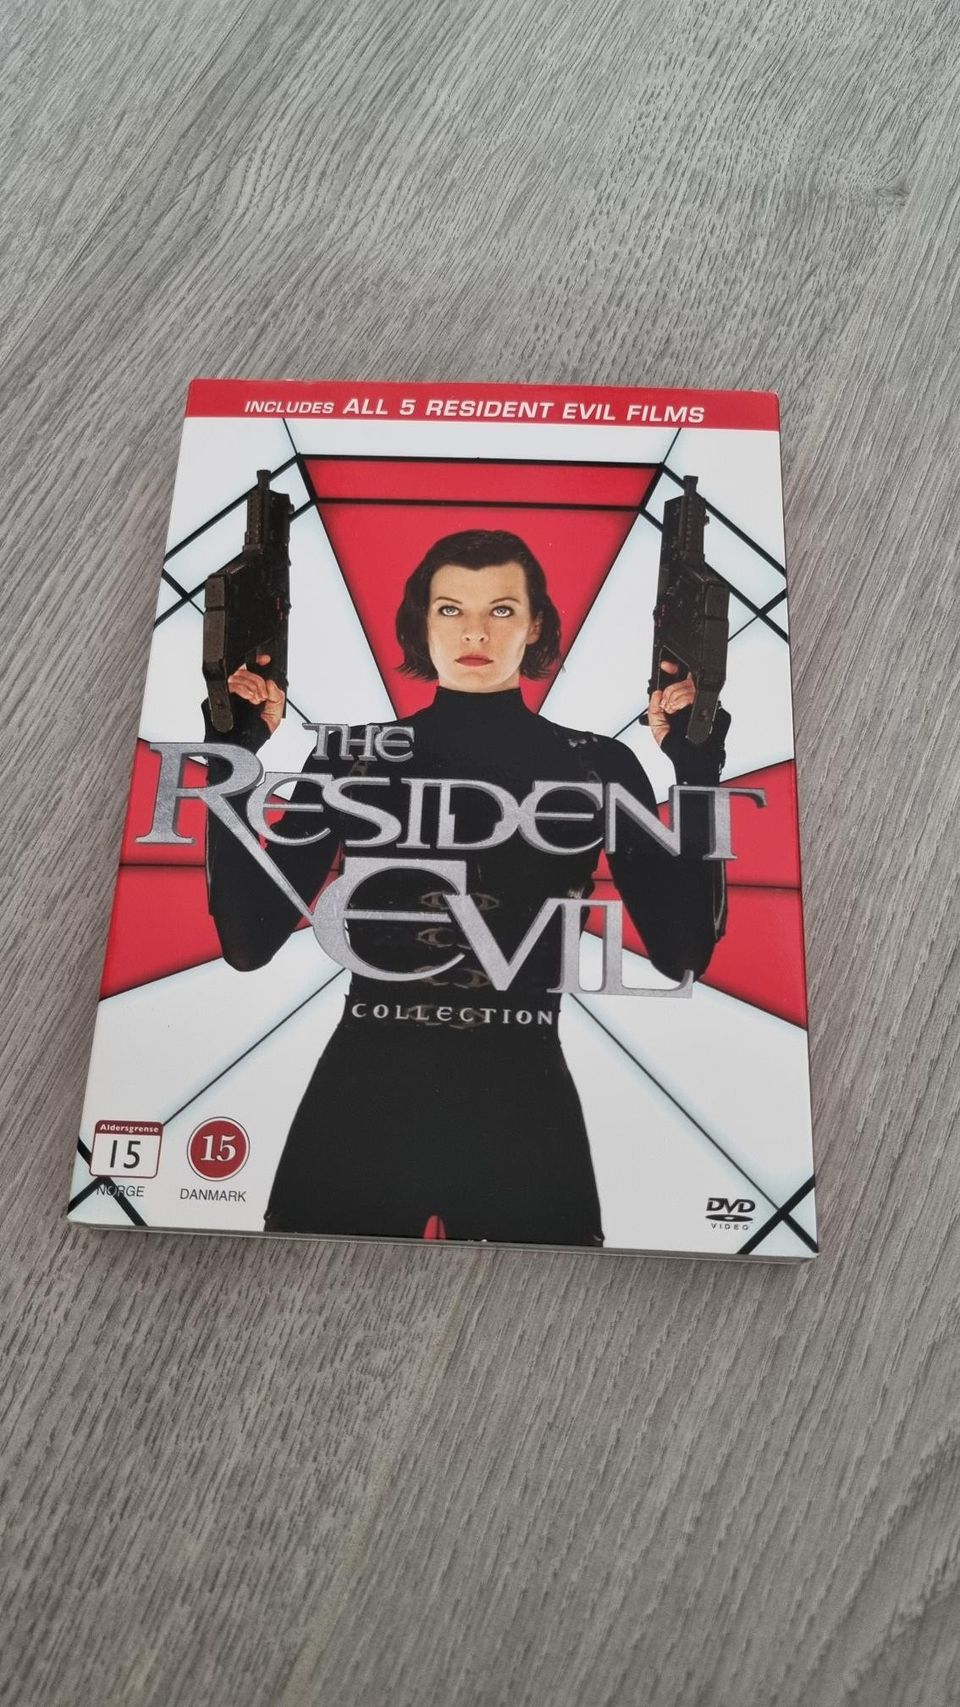 The Resident Evil Collection